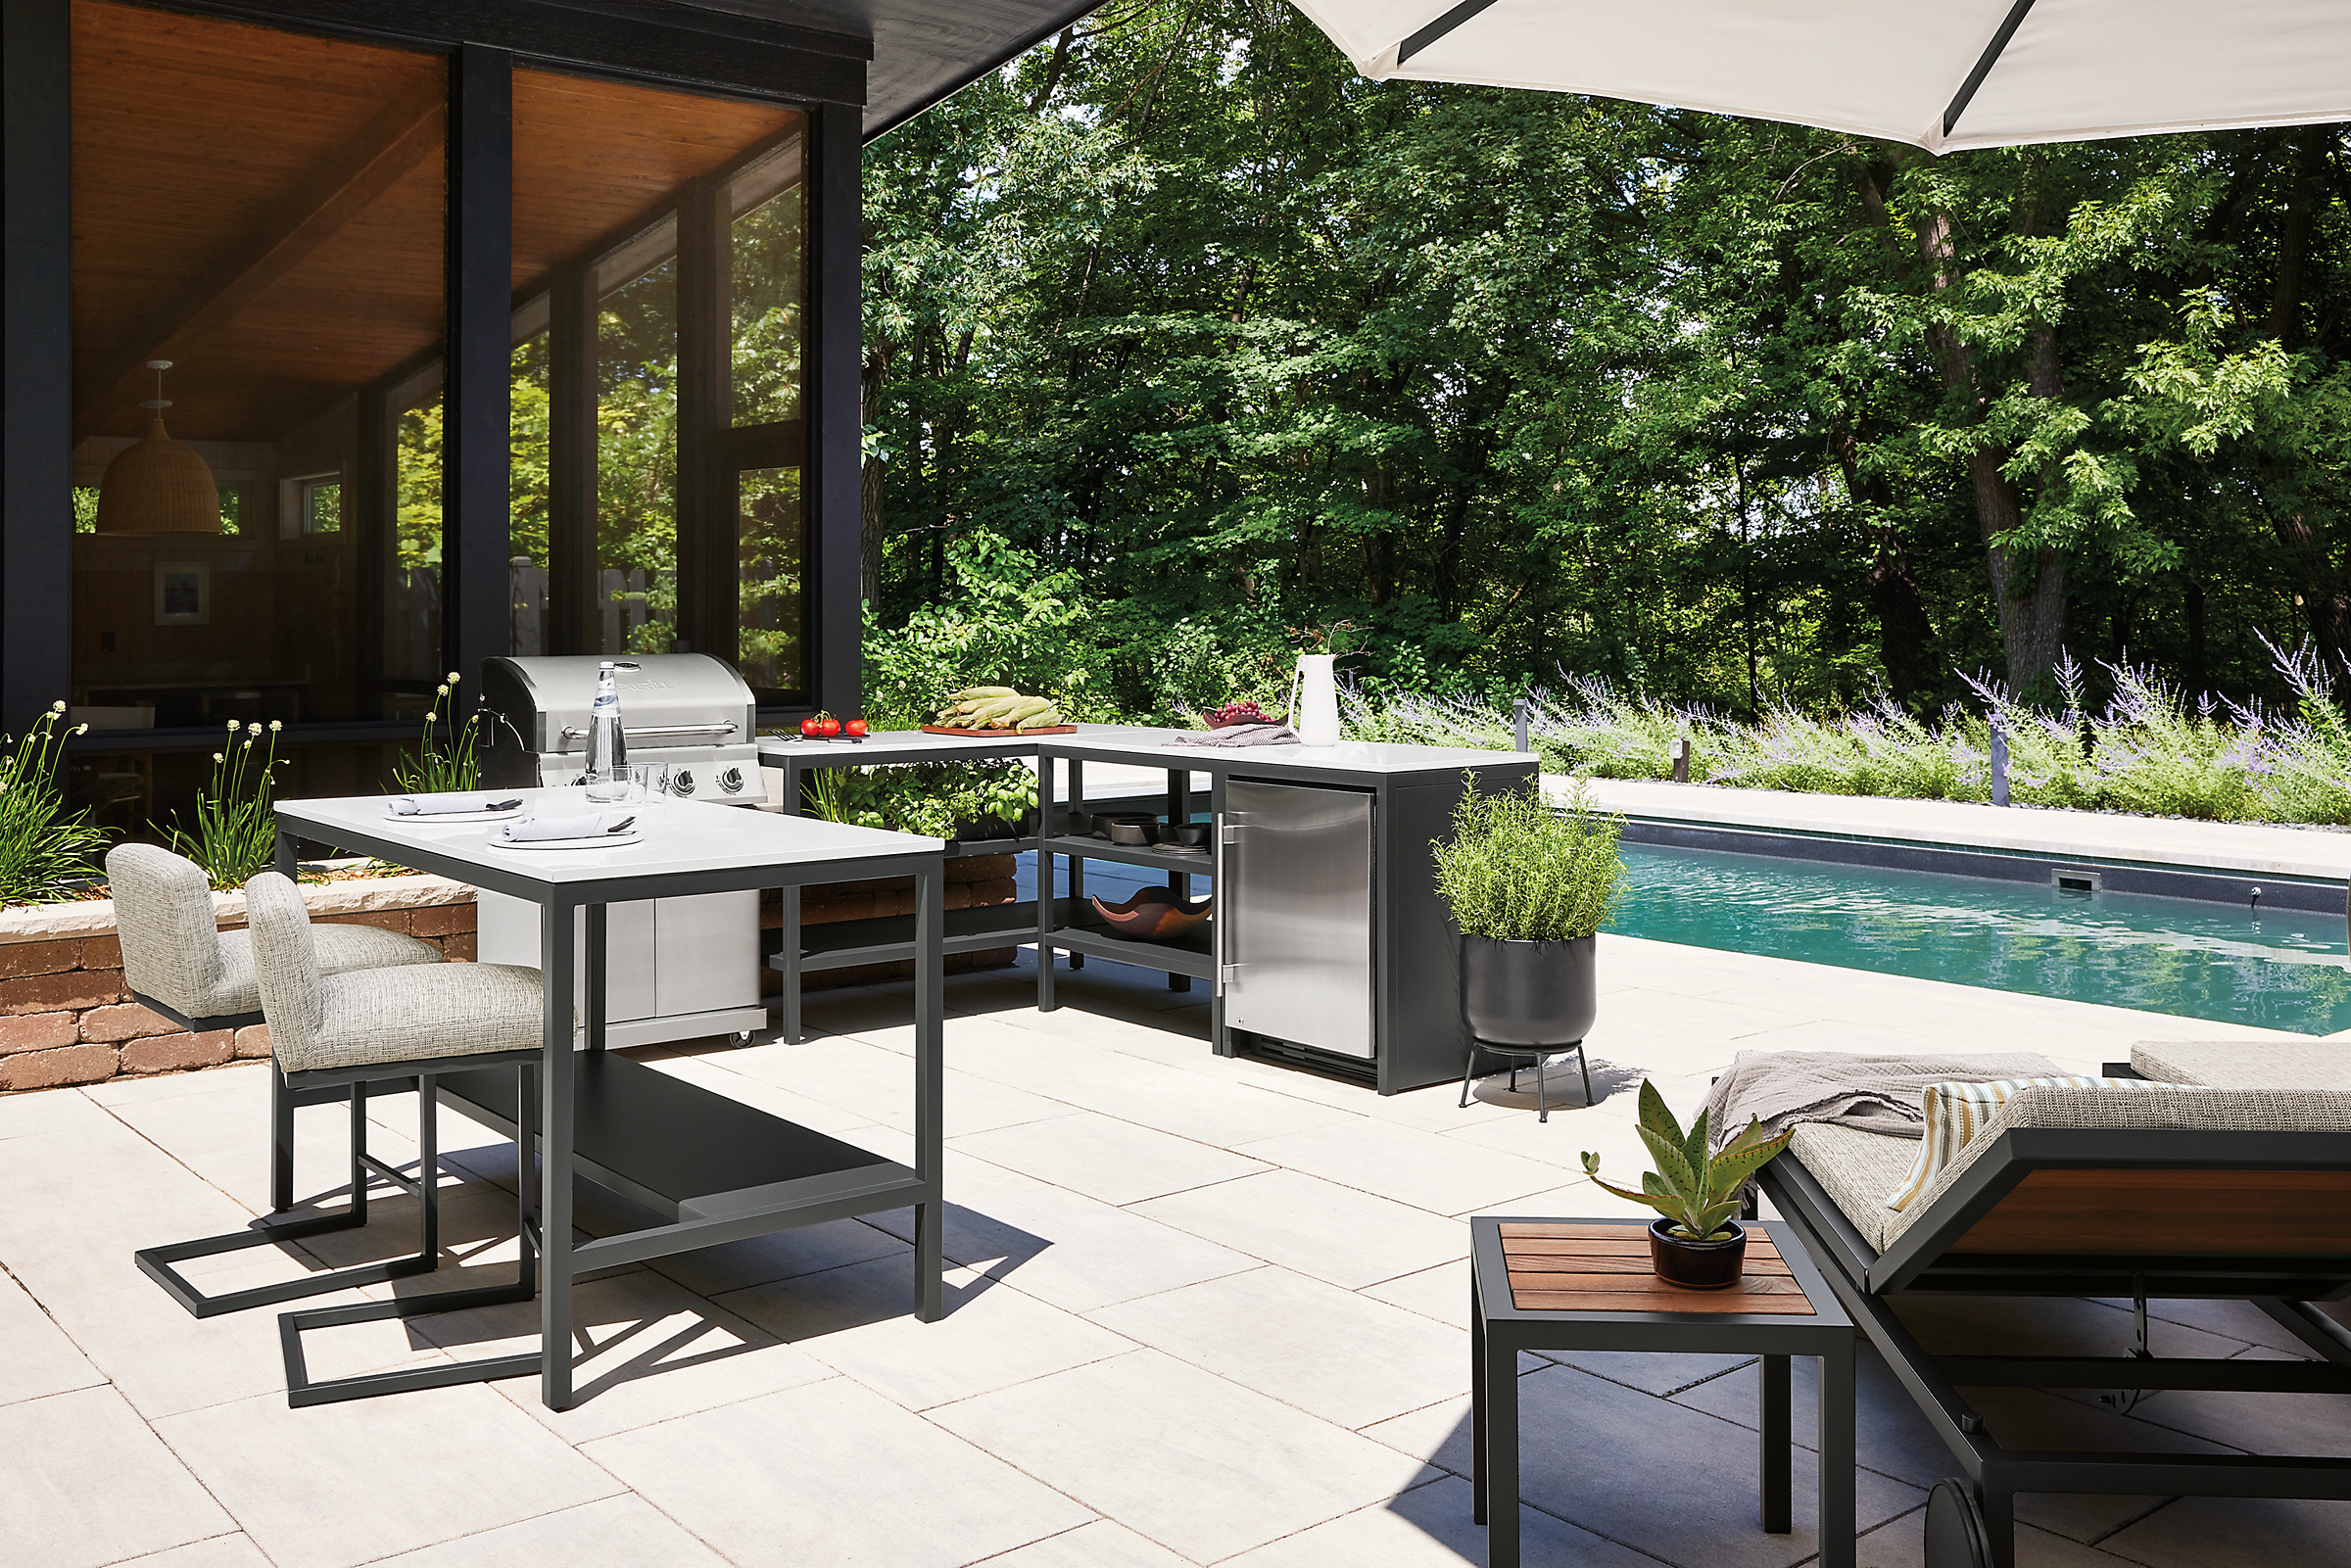 Outdoor space with parsons modular outdoor kitchen with fridge and grill and counter table.